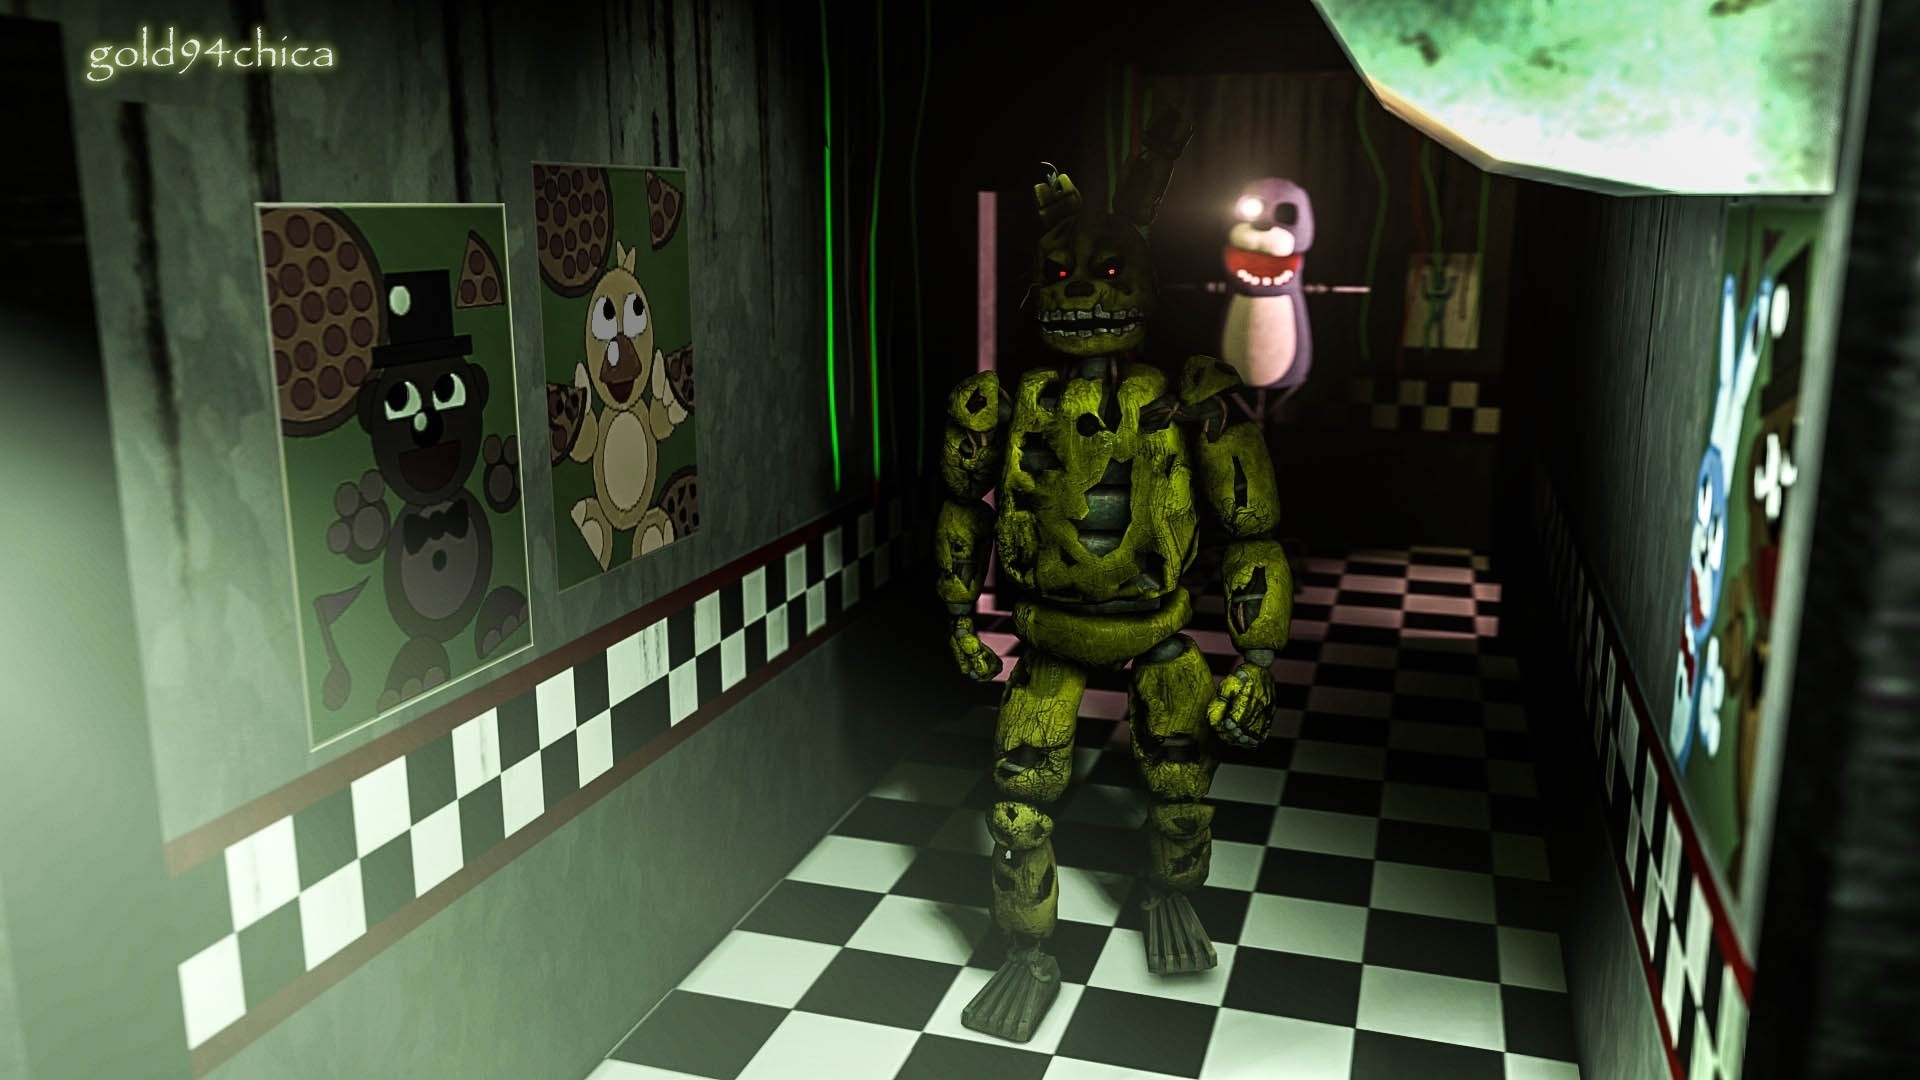 1920x1080 ... No More Mr. Nice Guy (Springtrap SFM Wallpaper) by gold94chica